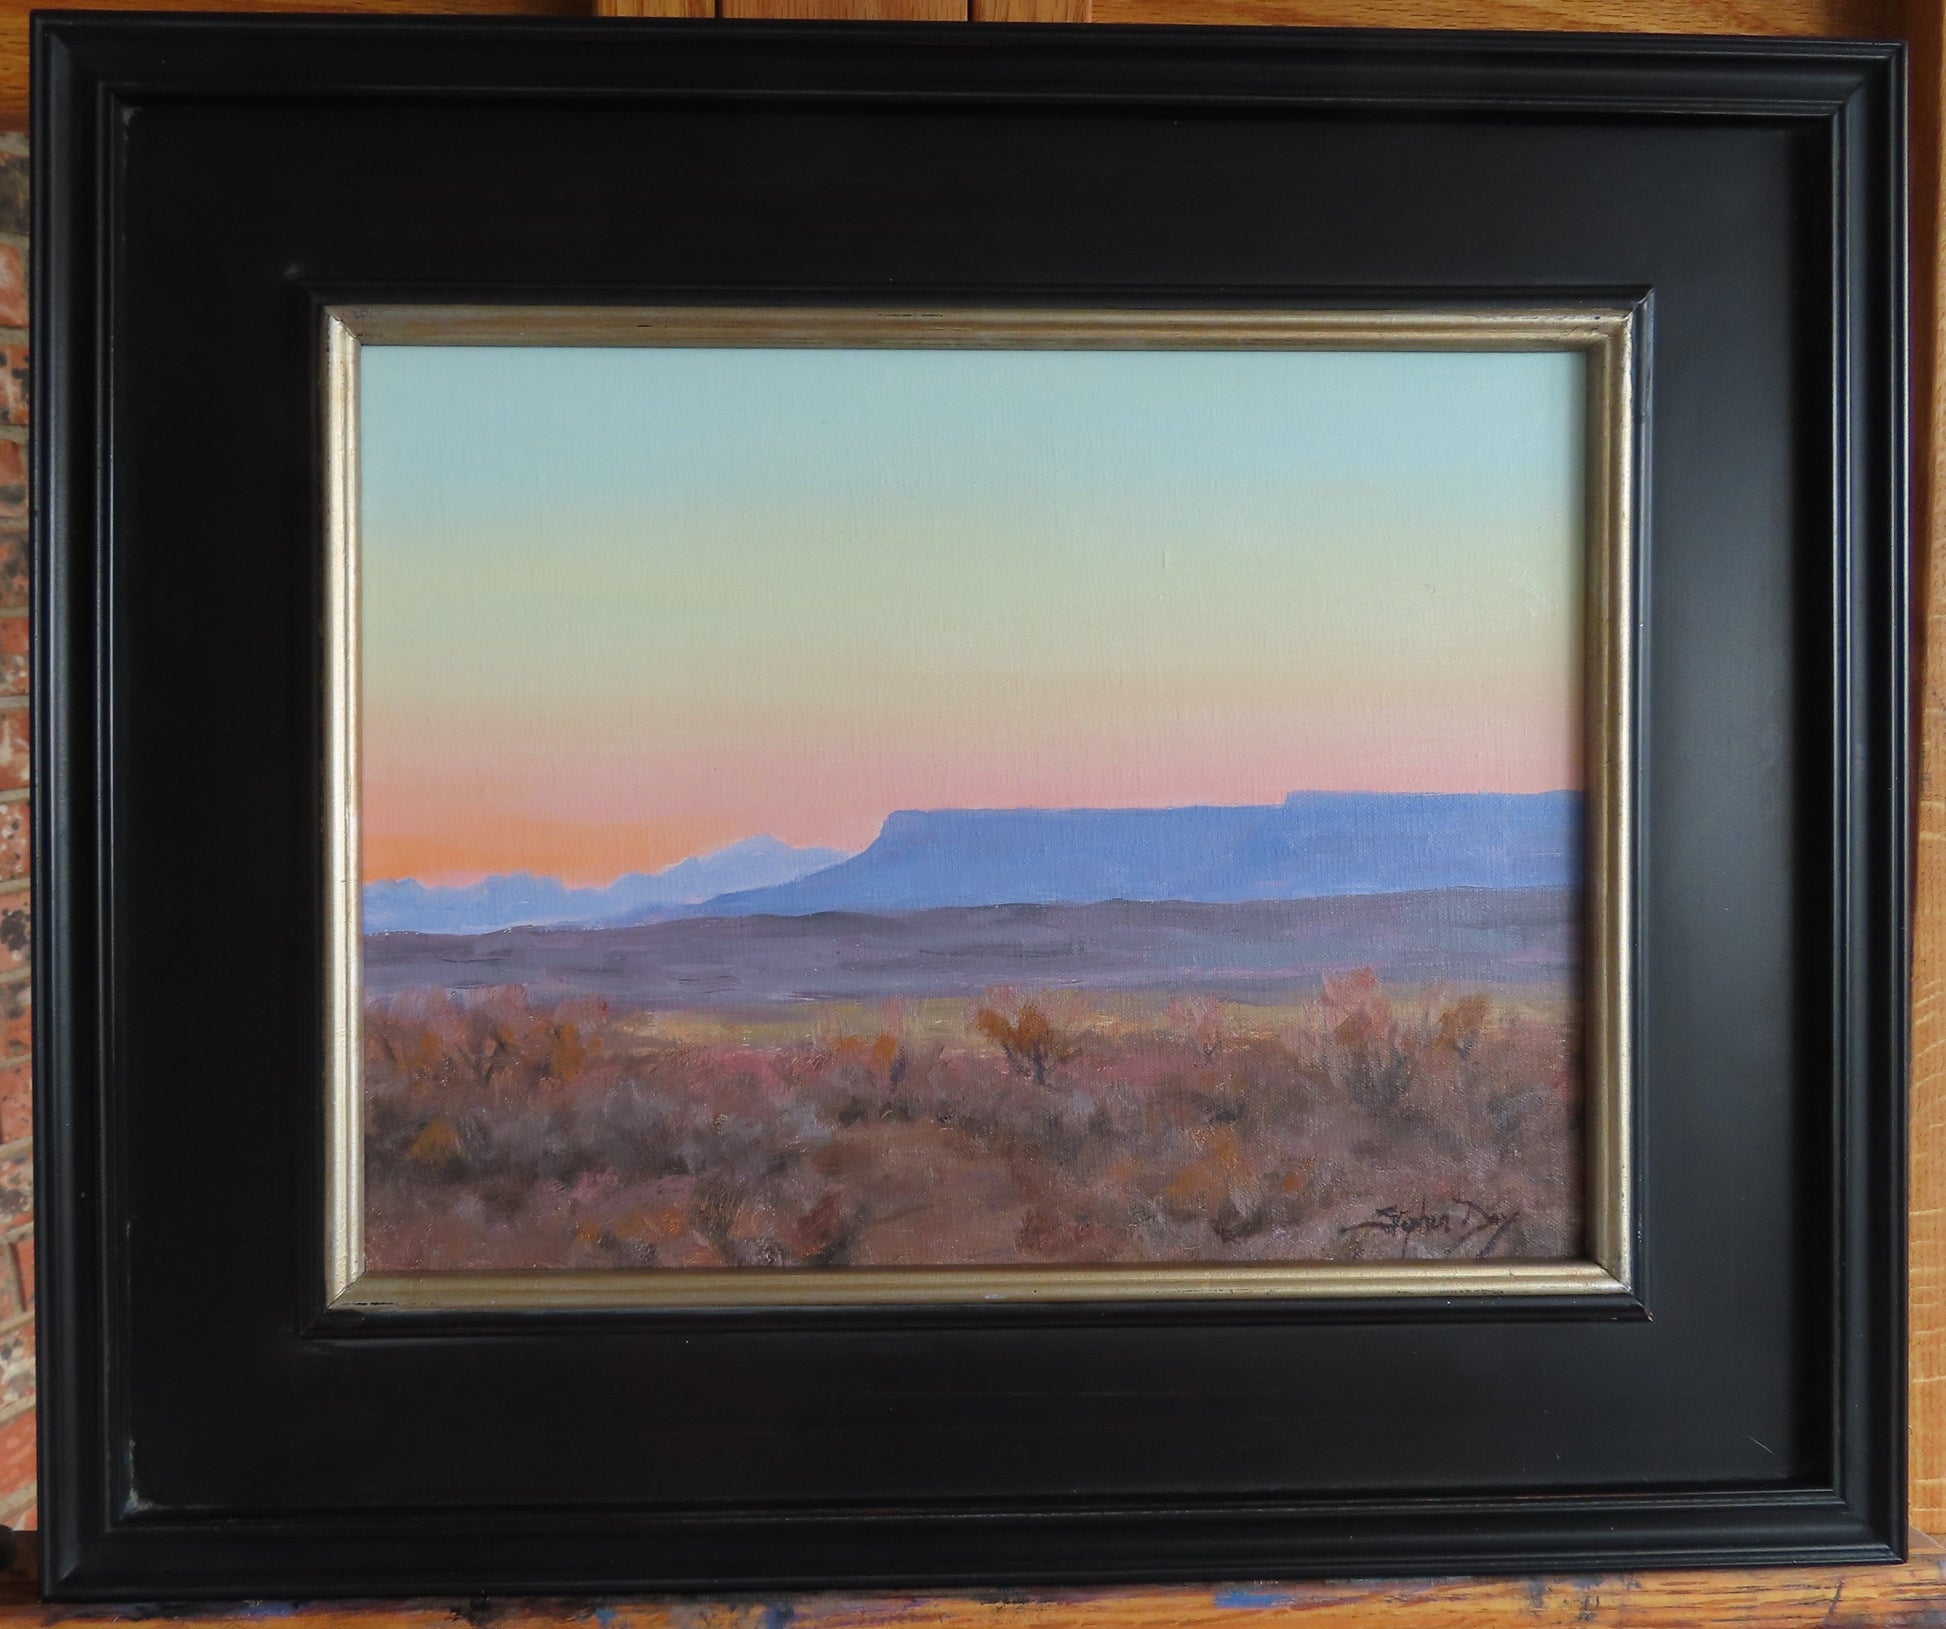 On The Way To Big Bend-painting-Stephen Day-Sorrel Sky Gallery